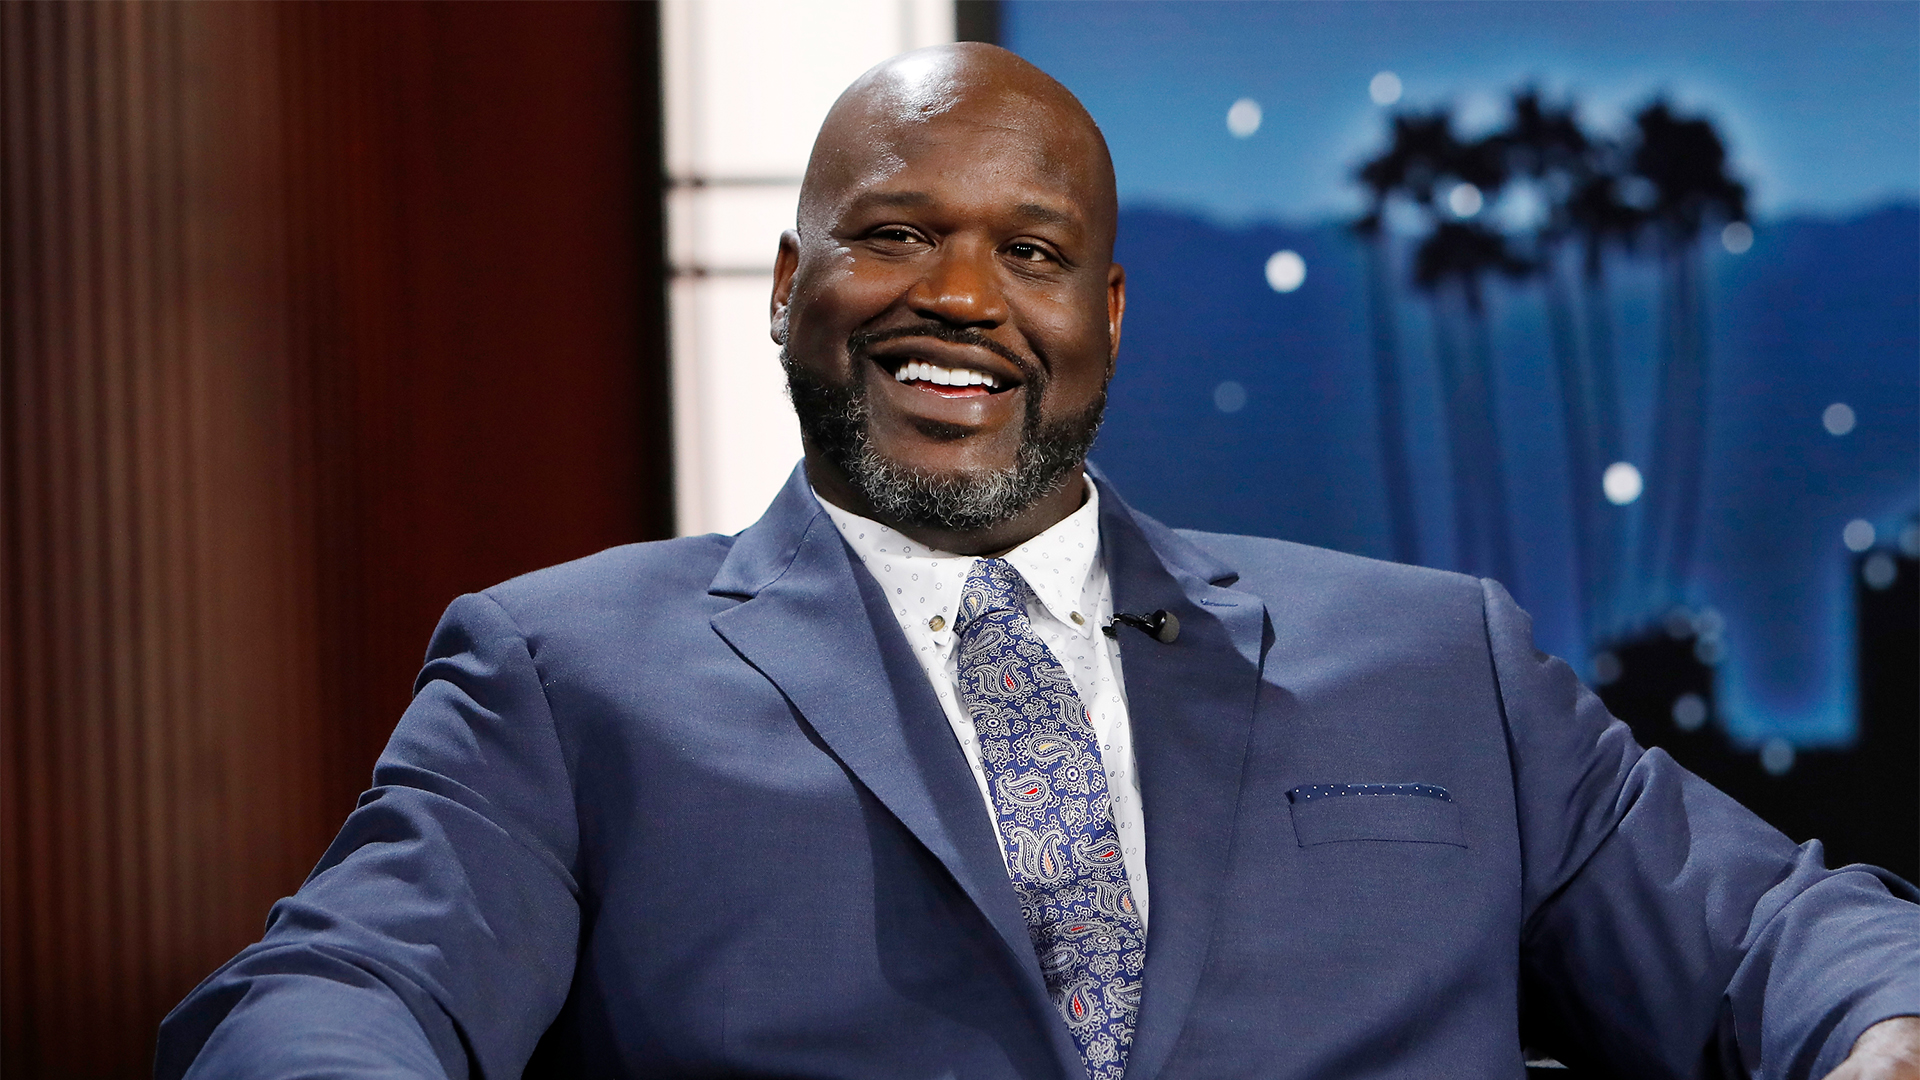 Is Shaquille O'Neal Gearing Up To Enter The Metaverse? These Trademark Filings Suggest So